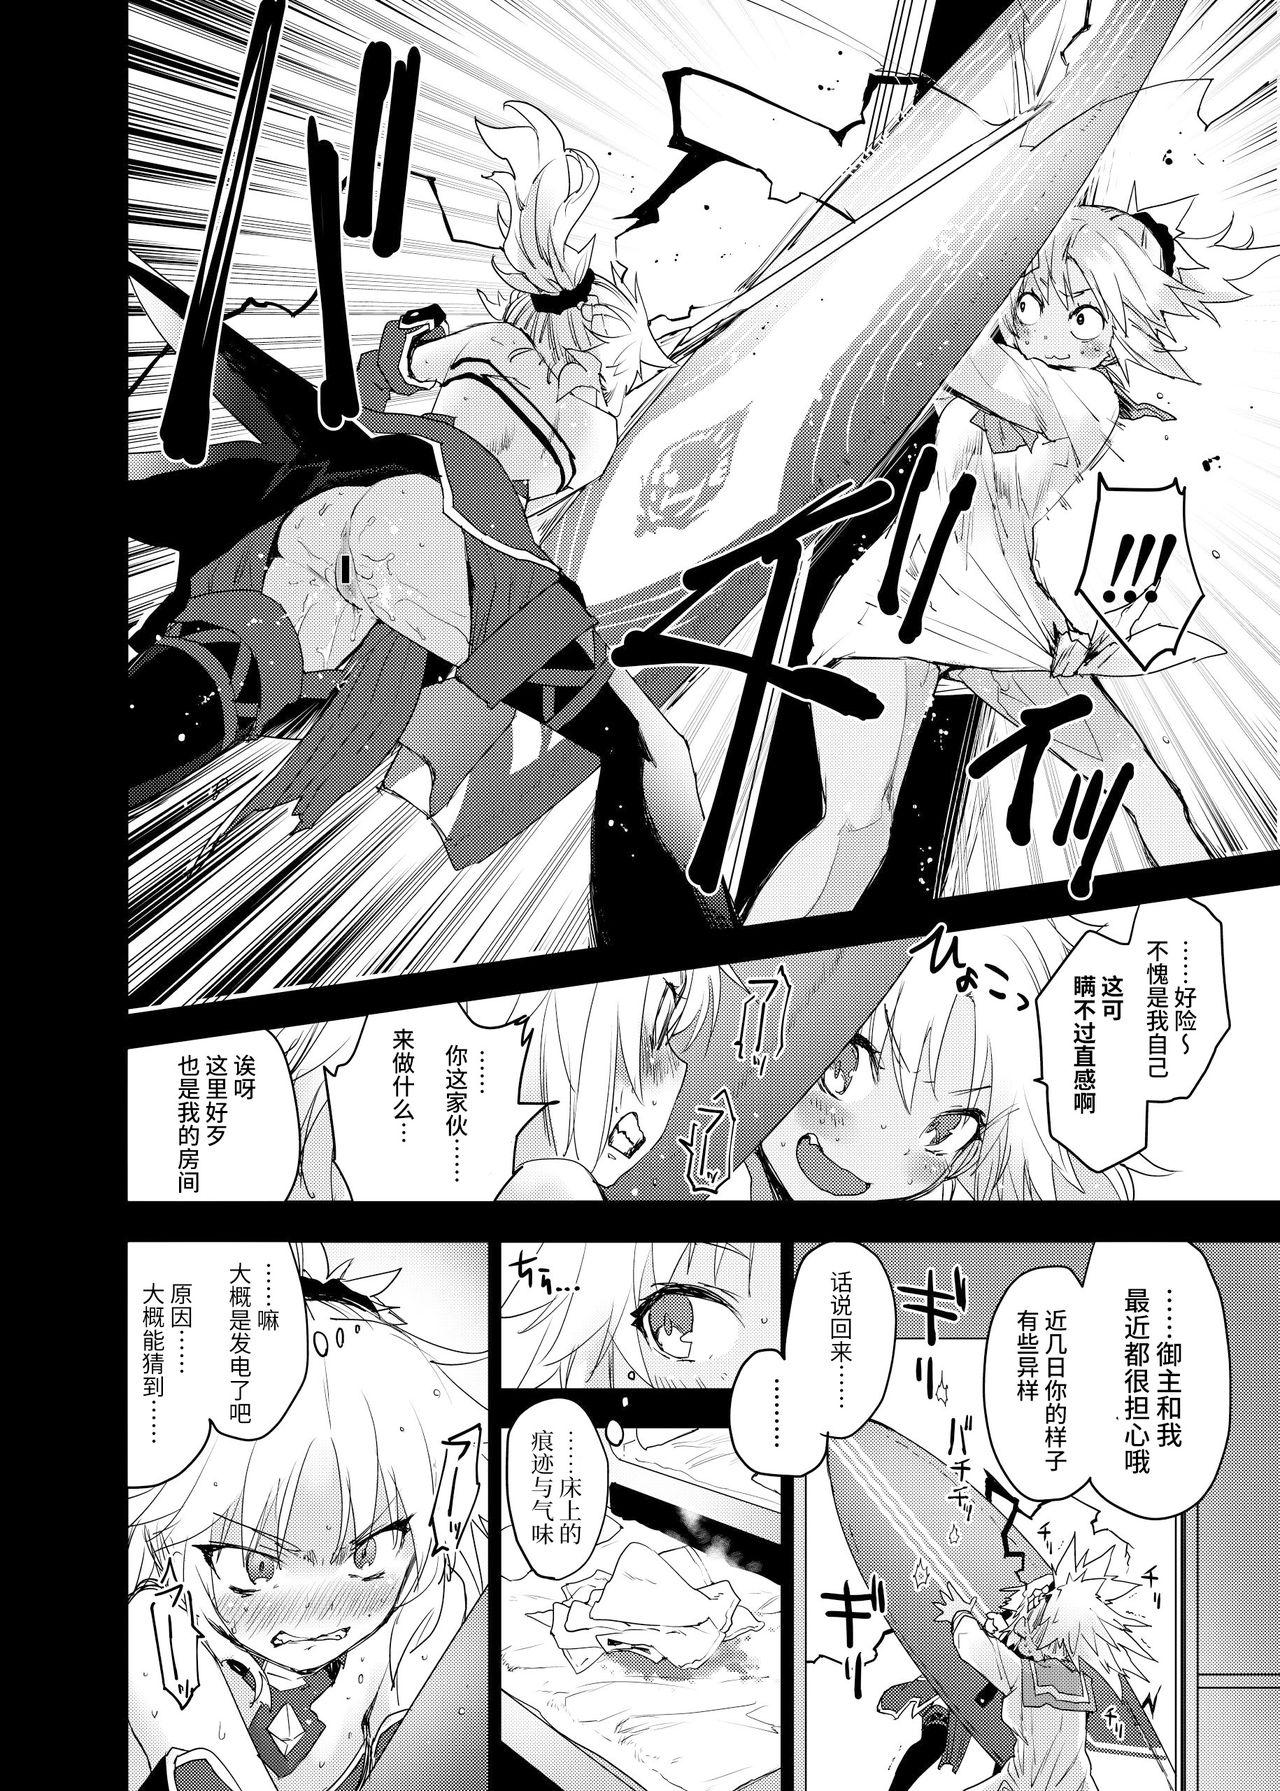 Amateurs With My Honey Knight - Fate grand order Amatuer Porn - Page 11